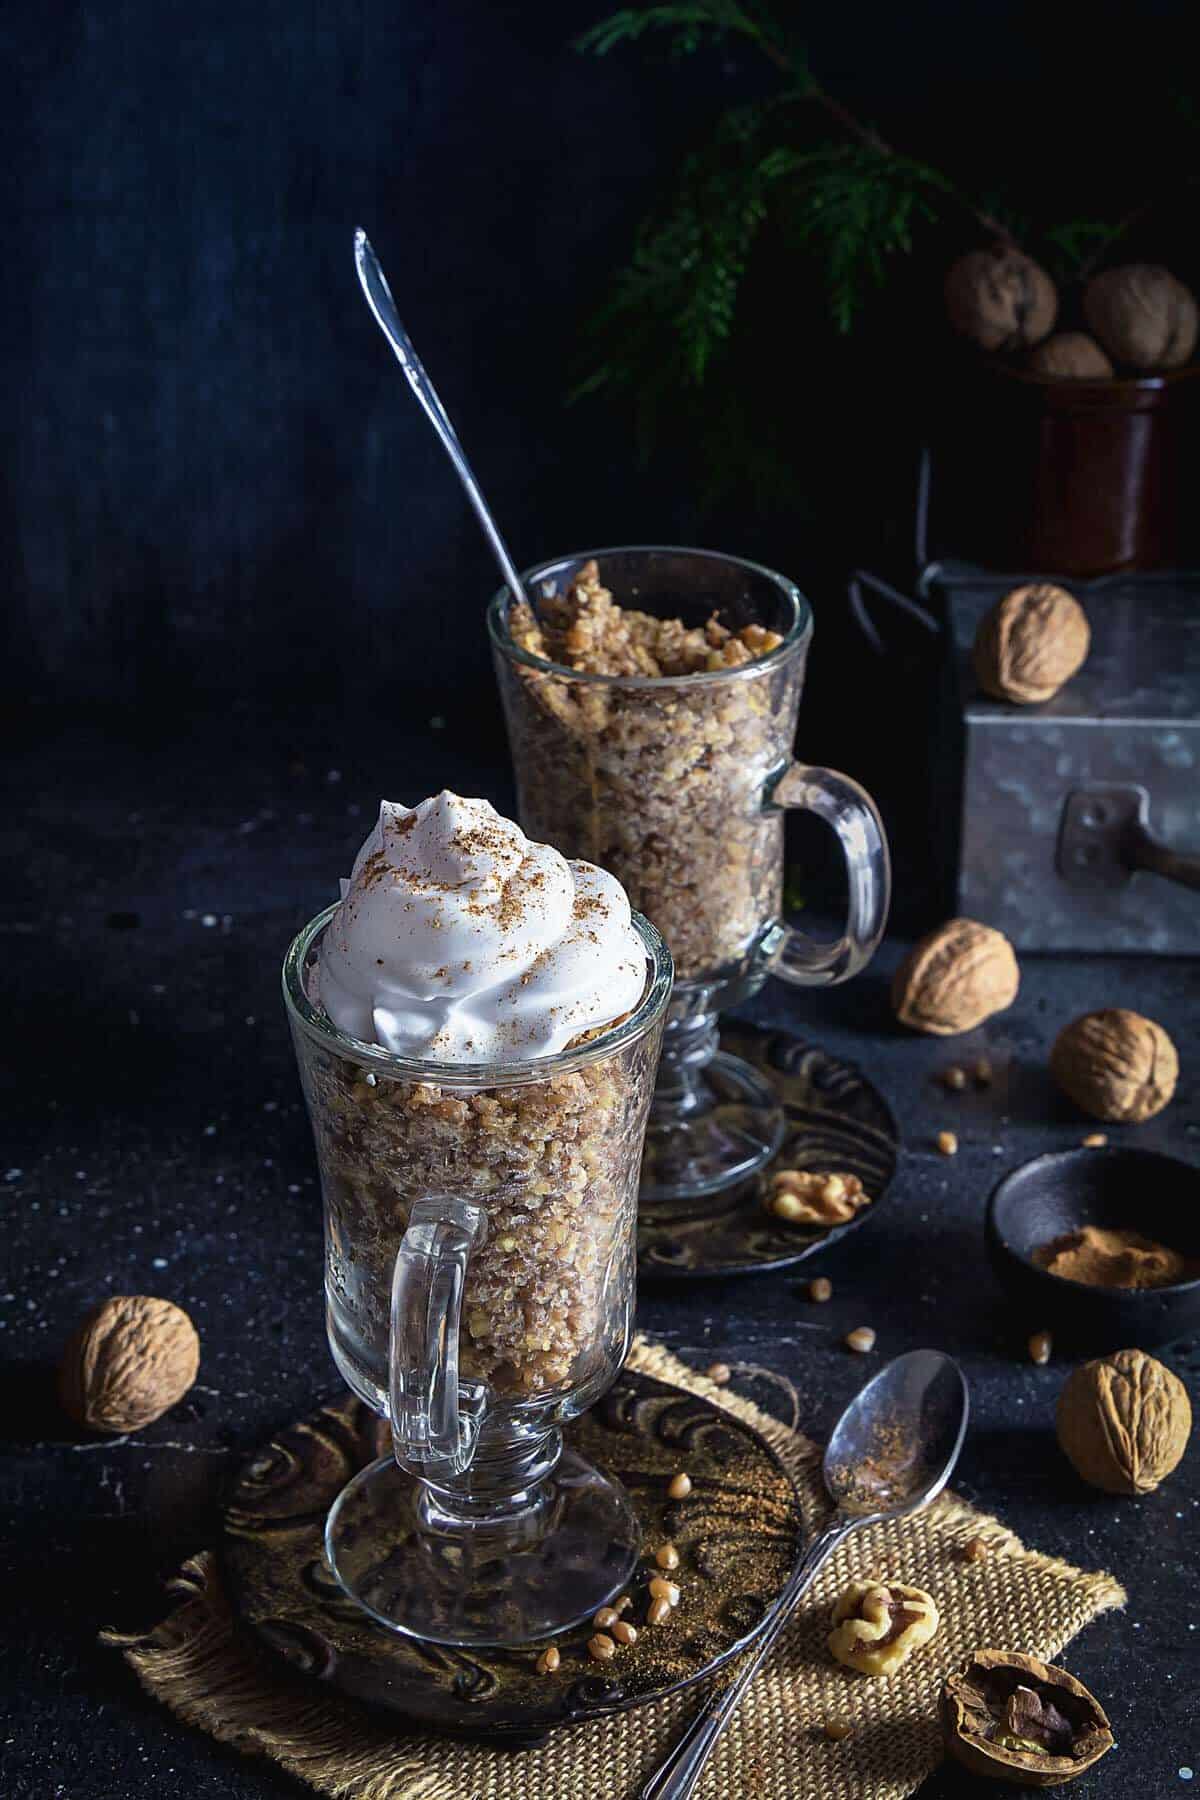 Two glasses with whole wheat berry pudding on a table, with walnuts and whipped cream.